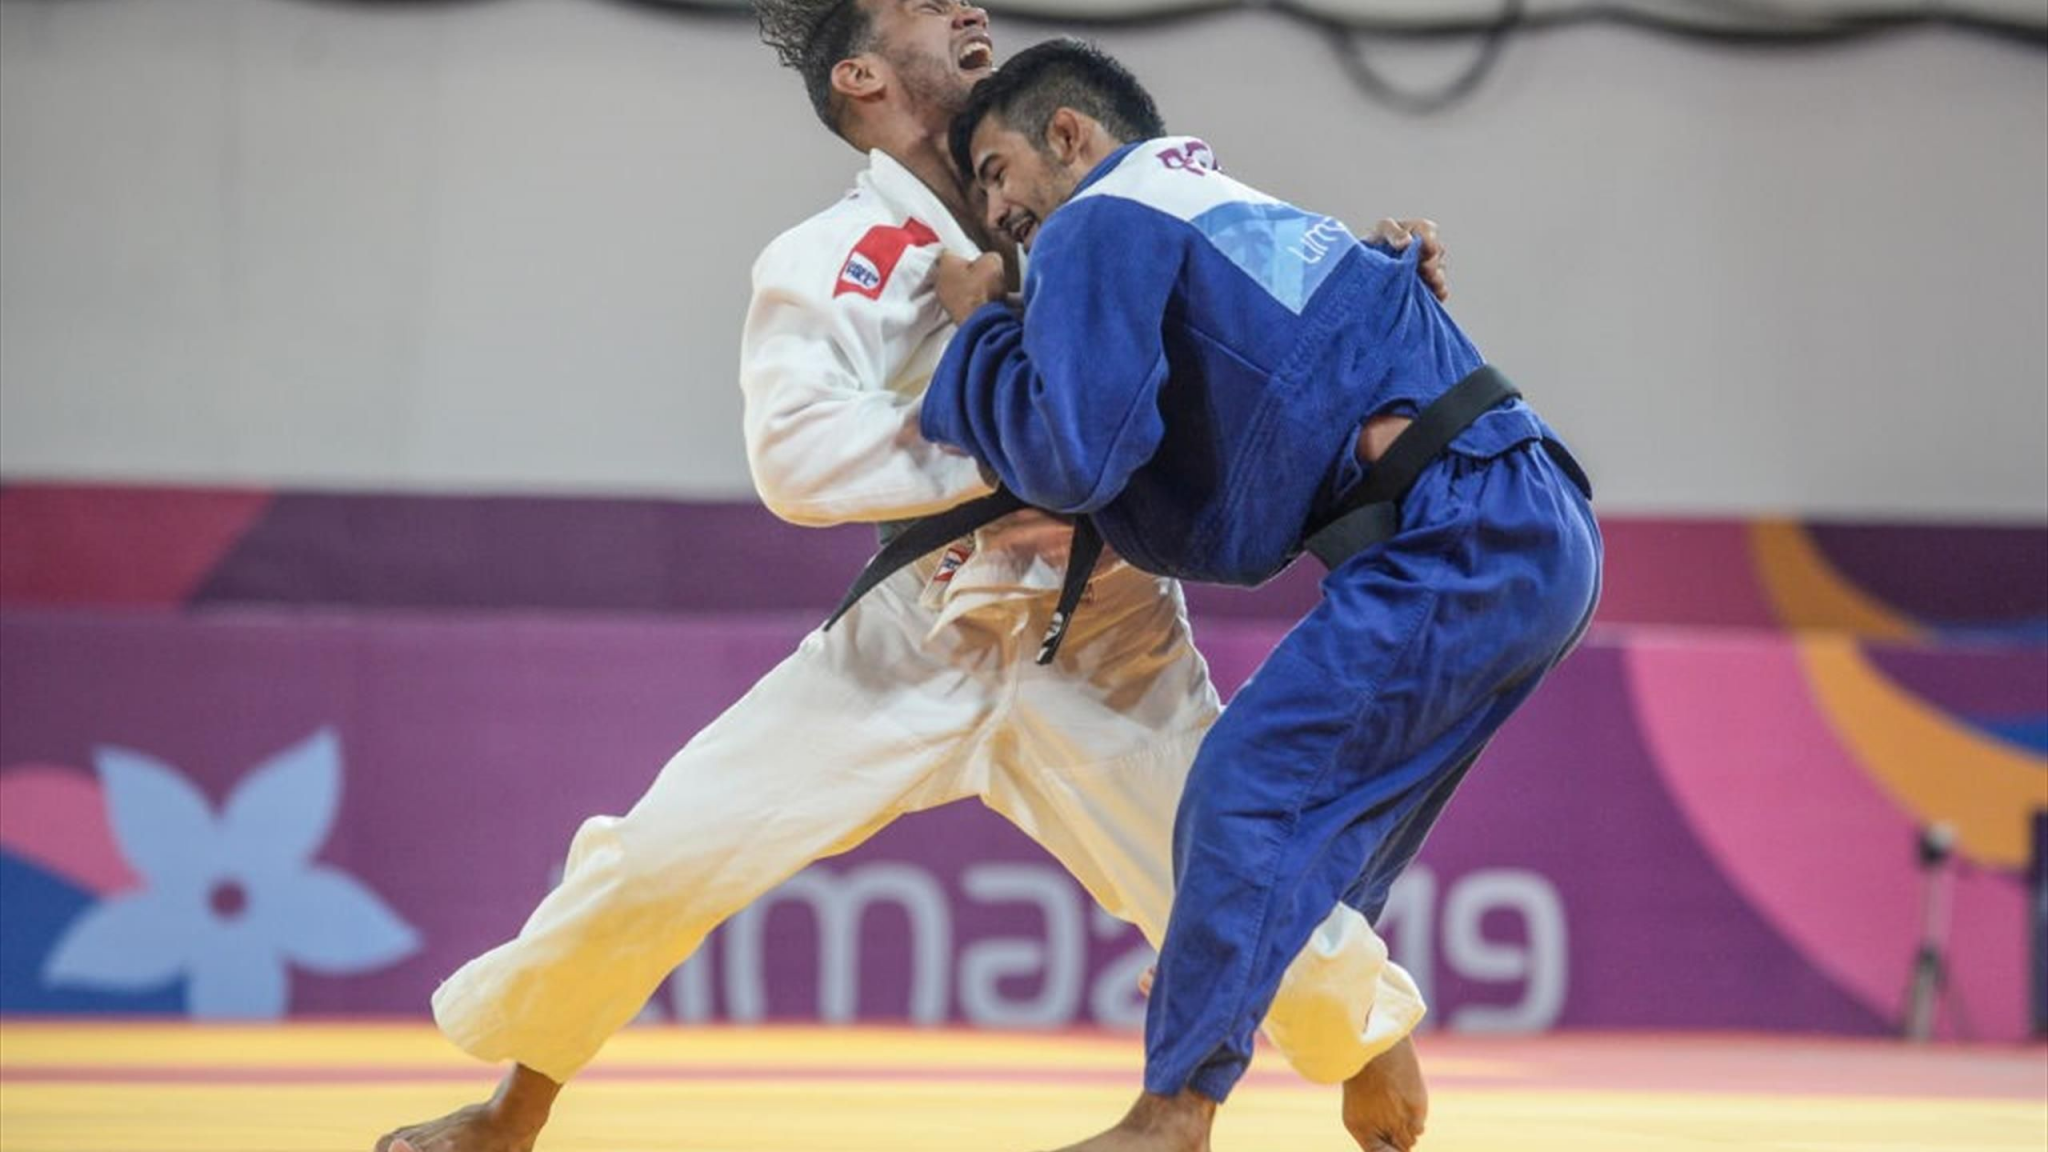 Judo is one of three sports that are set to be staged at the Centro de Deportes de Contacto during the Pan American Games in Santiago ©Getty Images